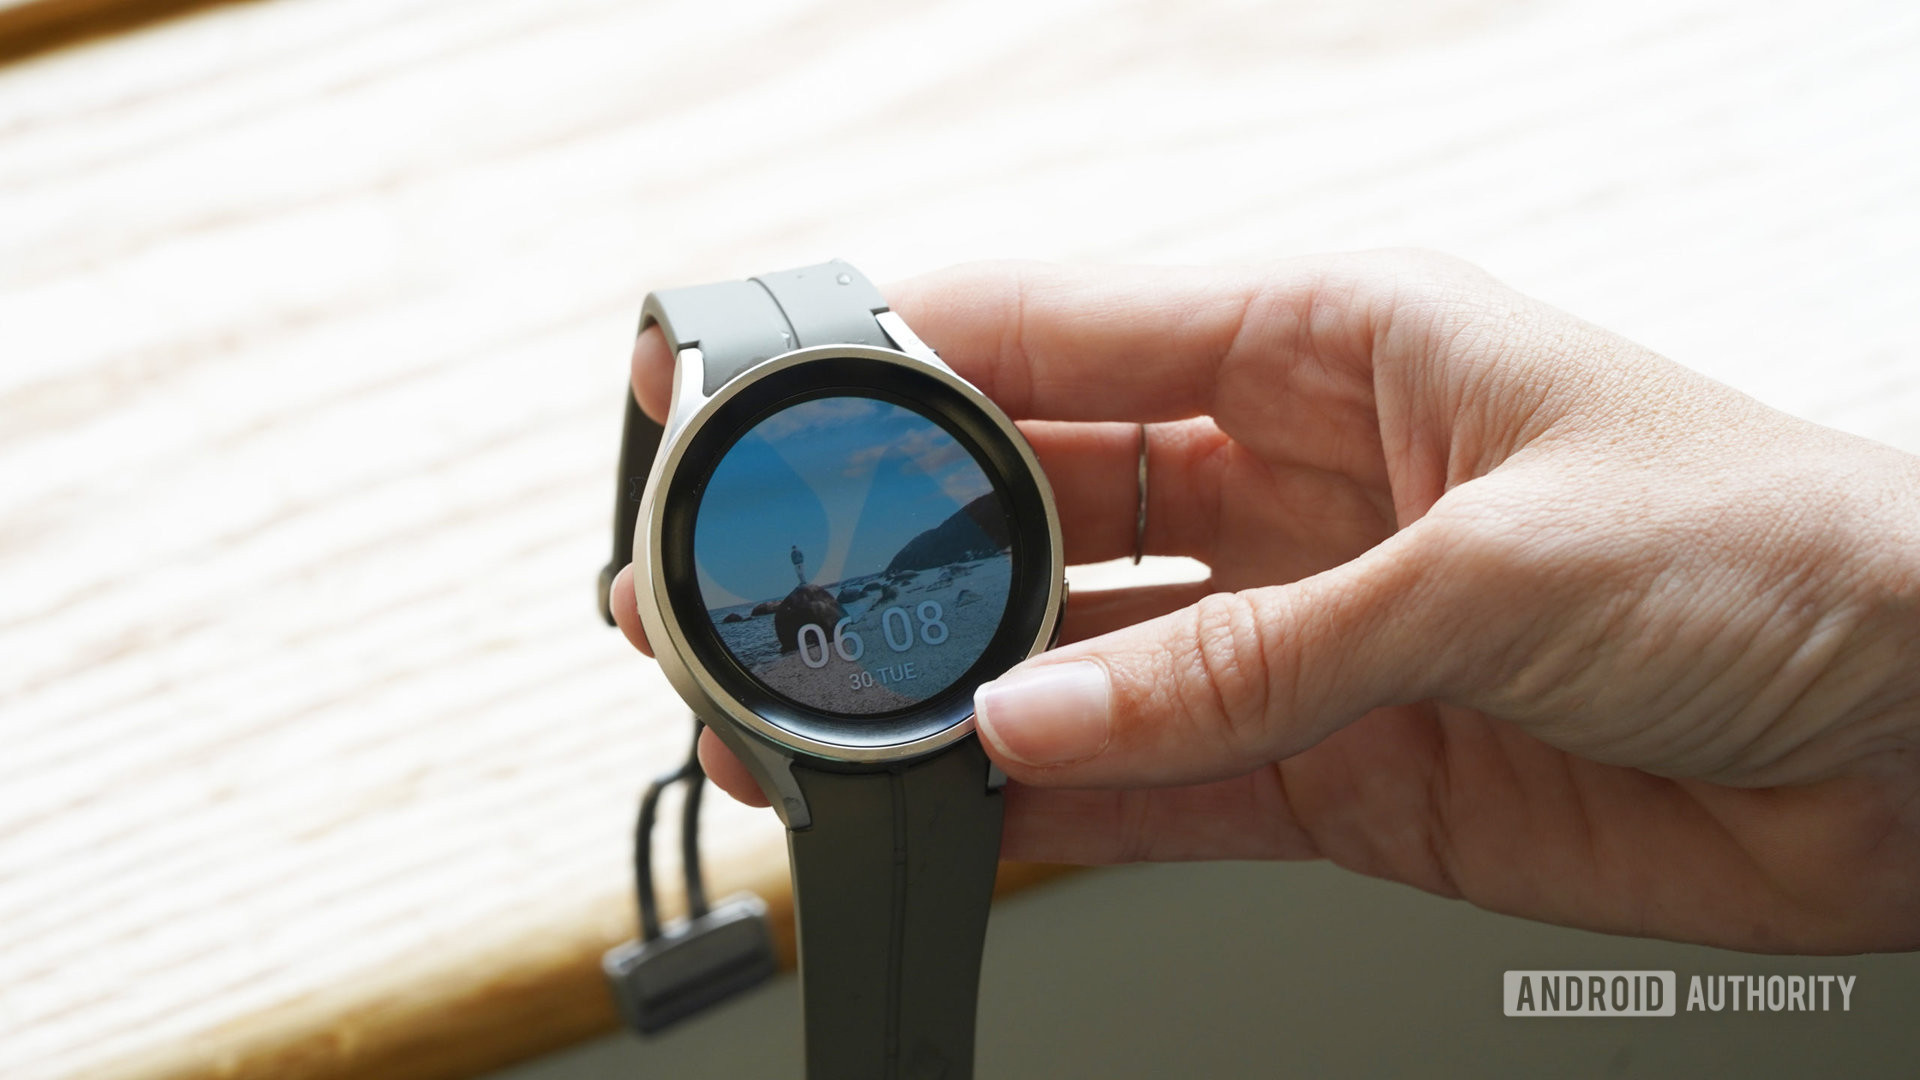 A Samsung Galaxy Watch 5 Pro in a user's hand displays the water Lock Screen.